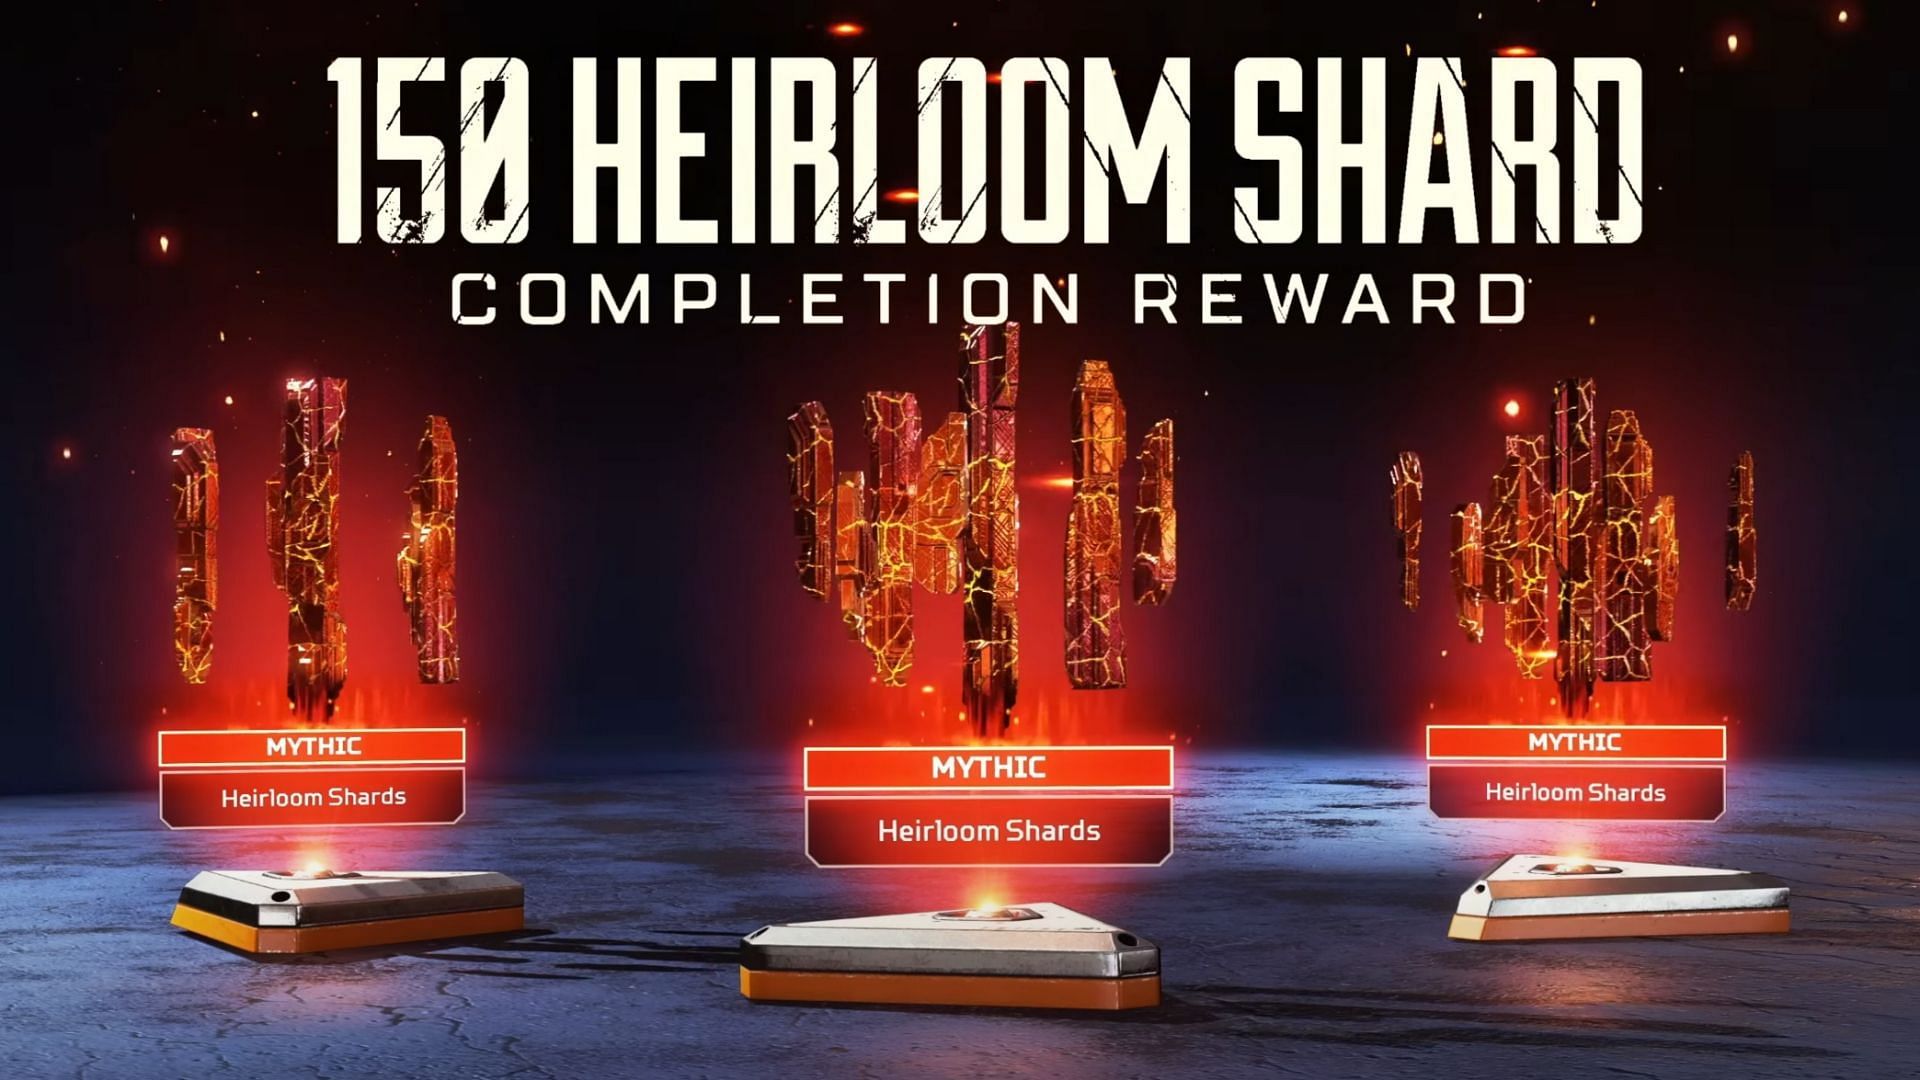 The final completion reward in the Anniversary Collection Event (Image via EA)